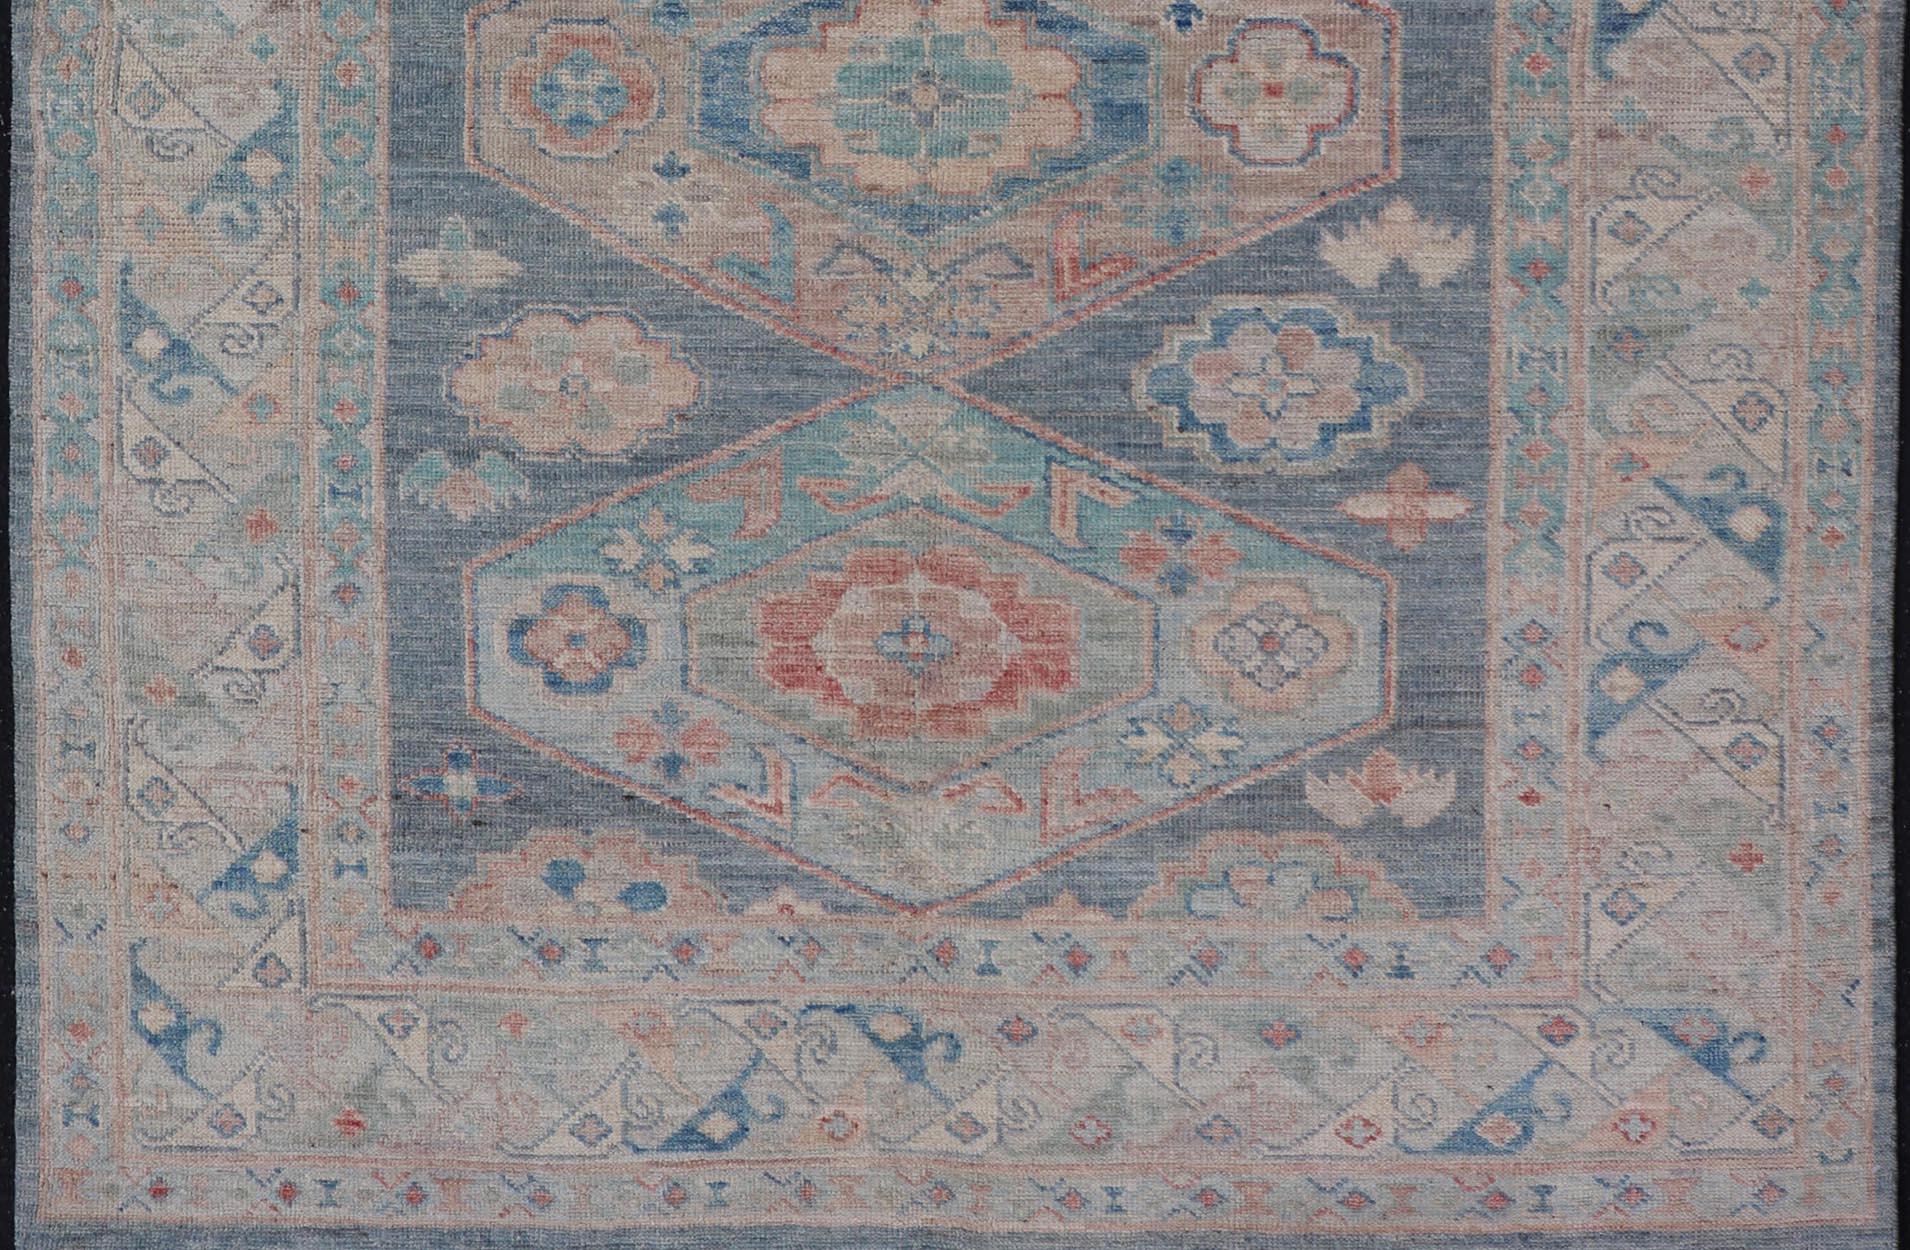 Modern Oushak With Large Medallion Design on A Blue-Gray Field. Keivan Woven Arts; rug AWR-8184 Country of Origin: Afghanistan Type: Oushak Circa 2020 
Measures: 5'2 x 7'0 
This modern Oushak features large medallions in the center of a blue-gray